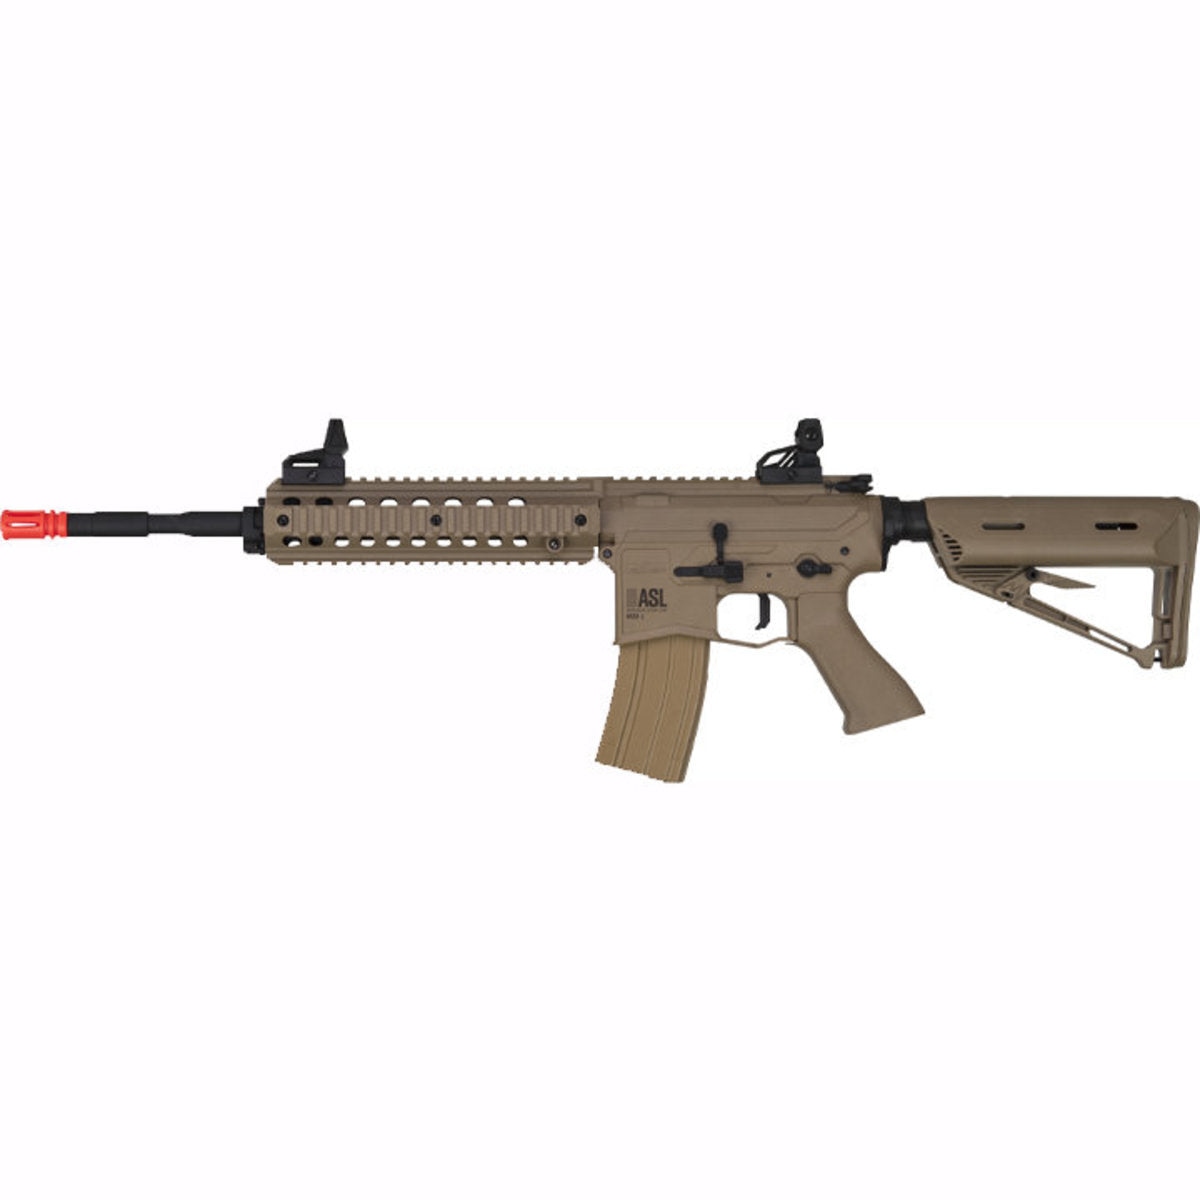 Valken ASL Hi-Velocity AEG MOD-L Airsoft Rifle - with Battery and Charger